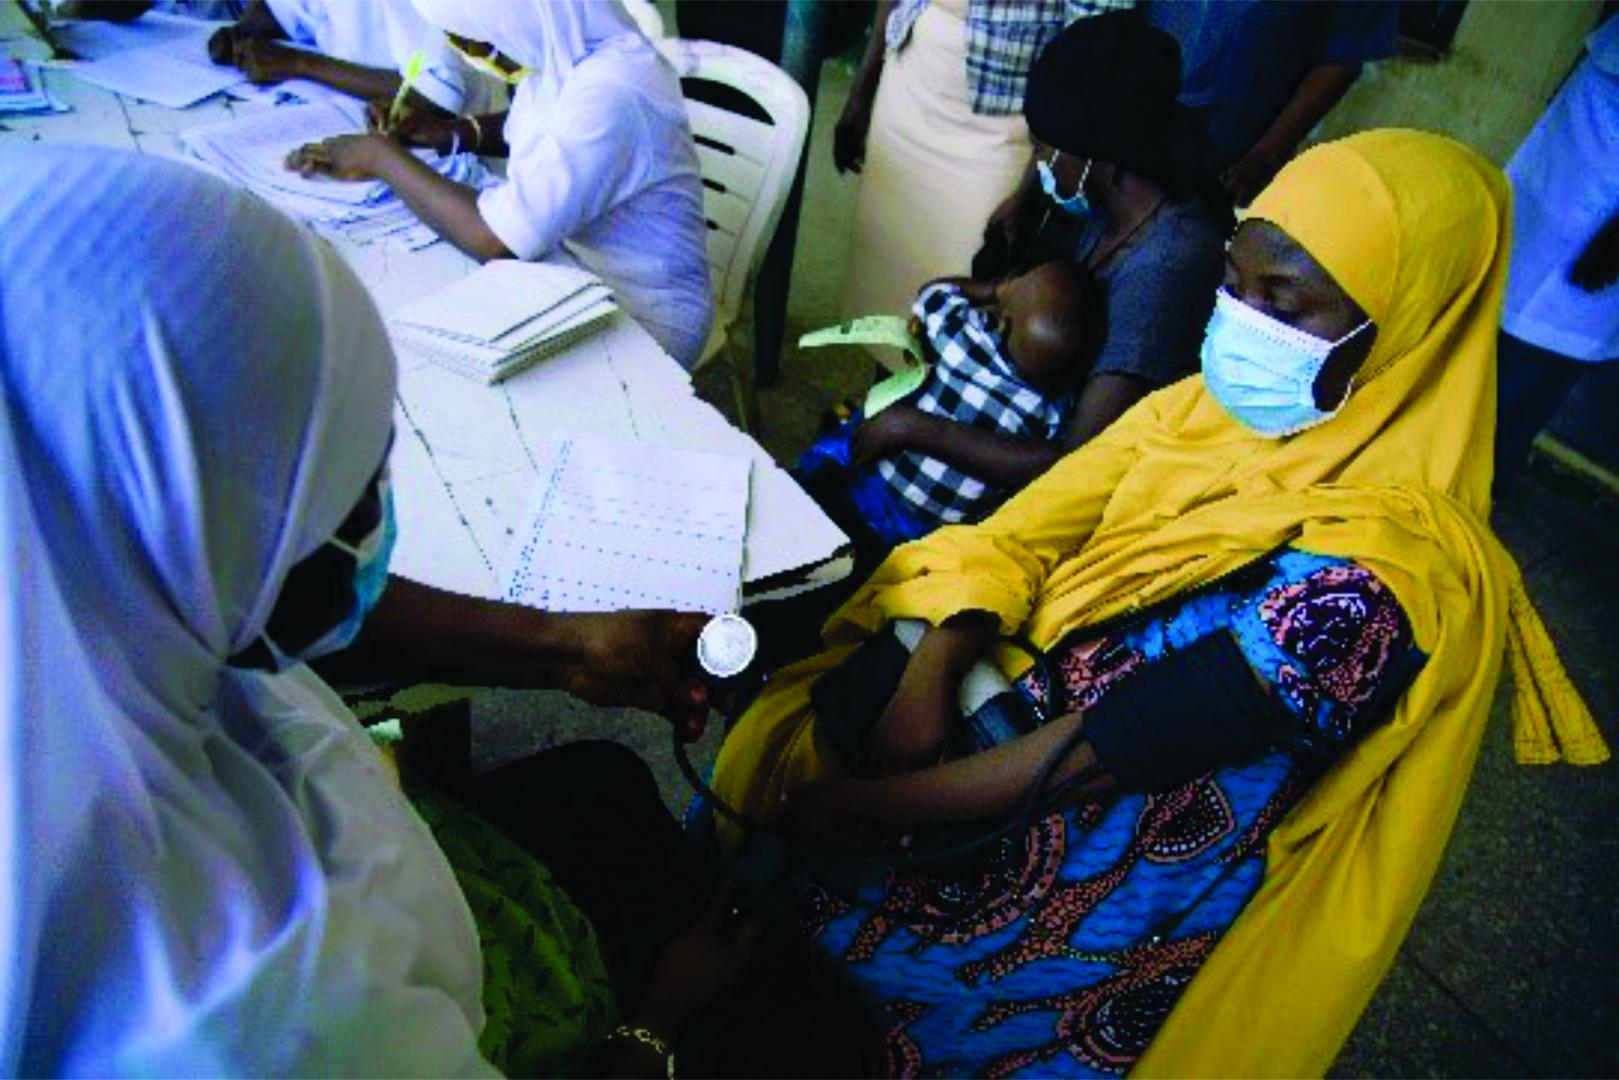 A health worker checking a patient’s blood pressure